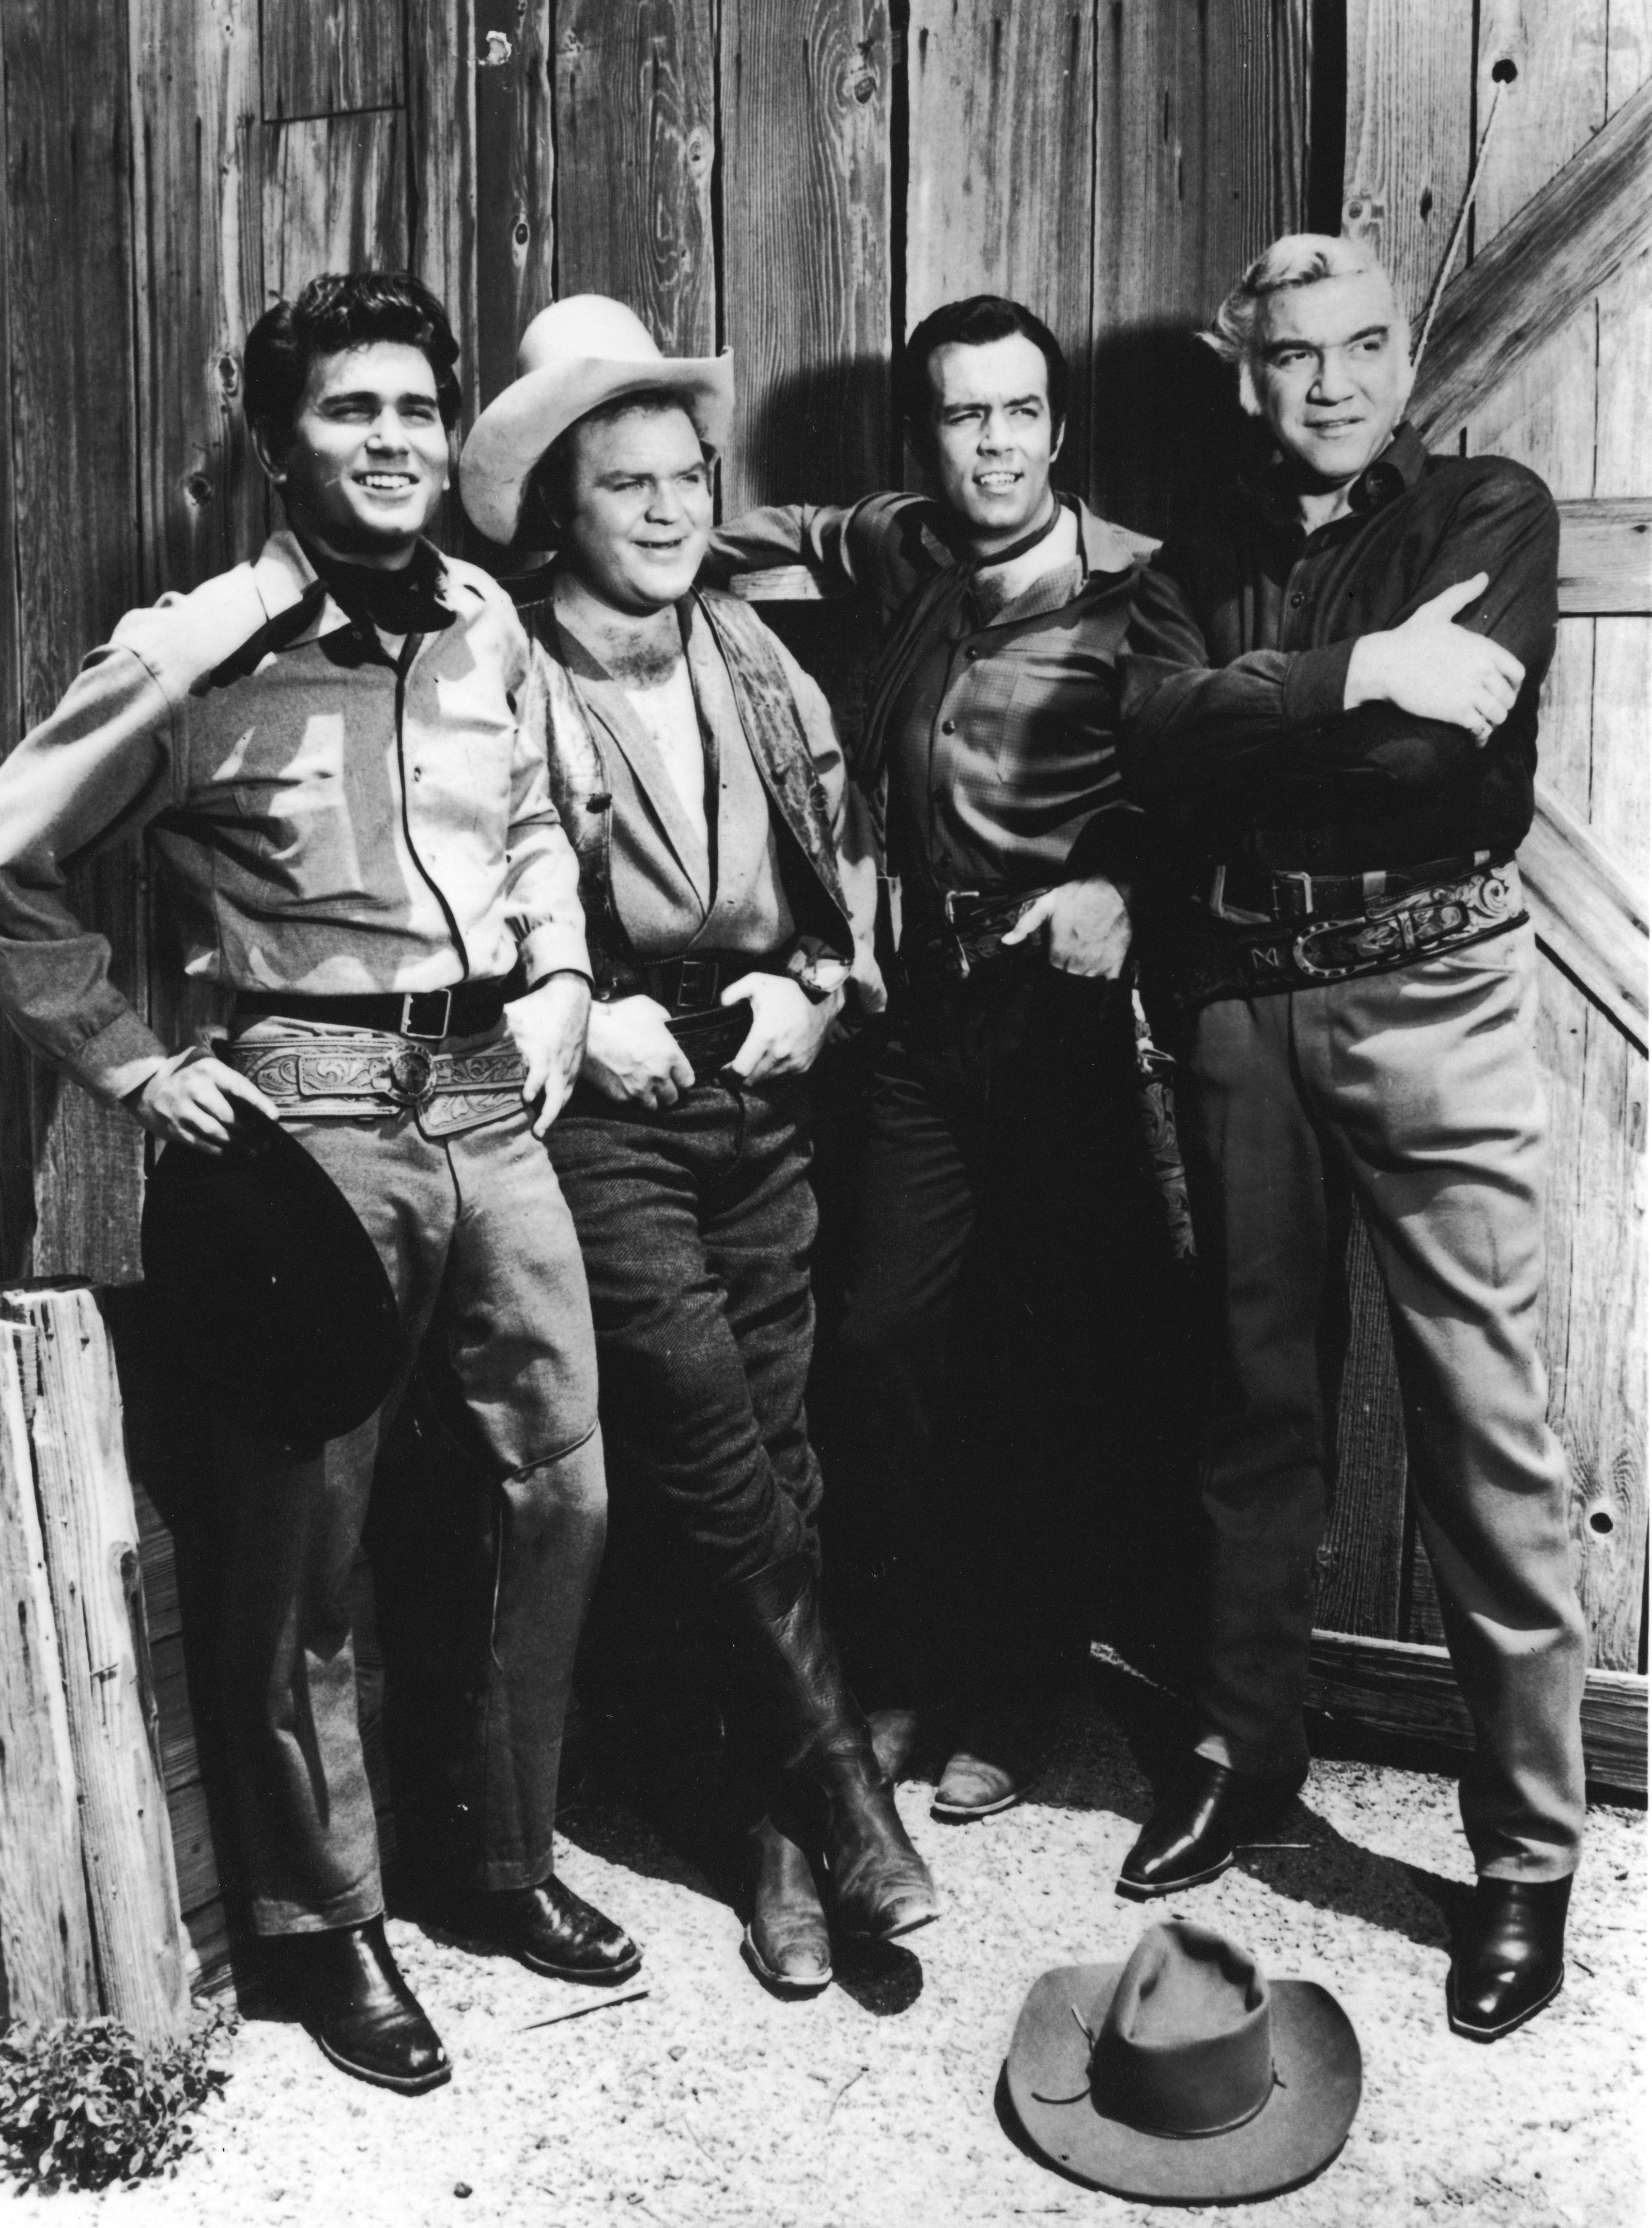 American actors Michael Landon, Dan Blocker, and Pernell Williams, and Canadian actor Lorne Green, for the television program, 'Bonanza,' in 1965. | Source: Paramount Pictures/Getty Images